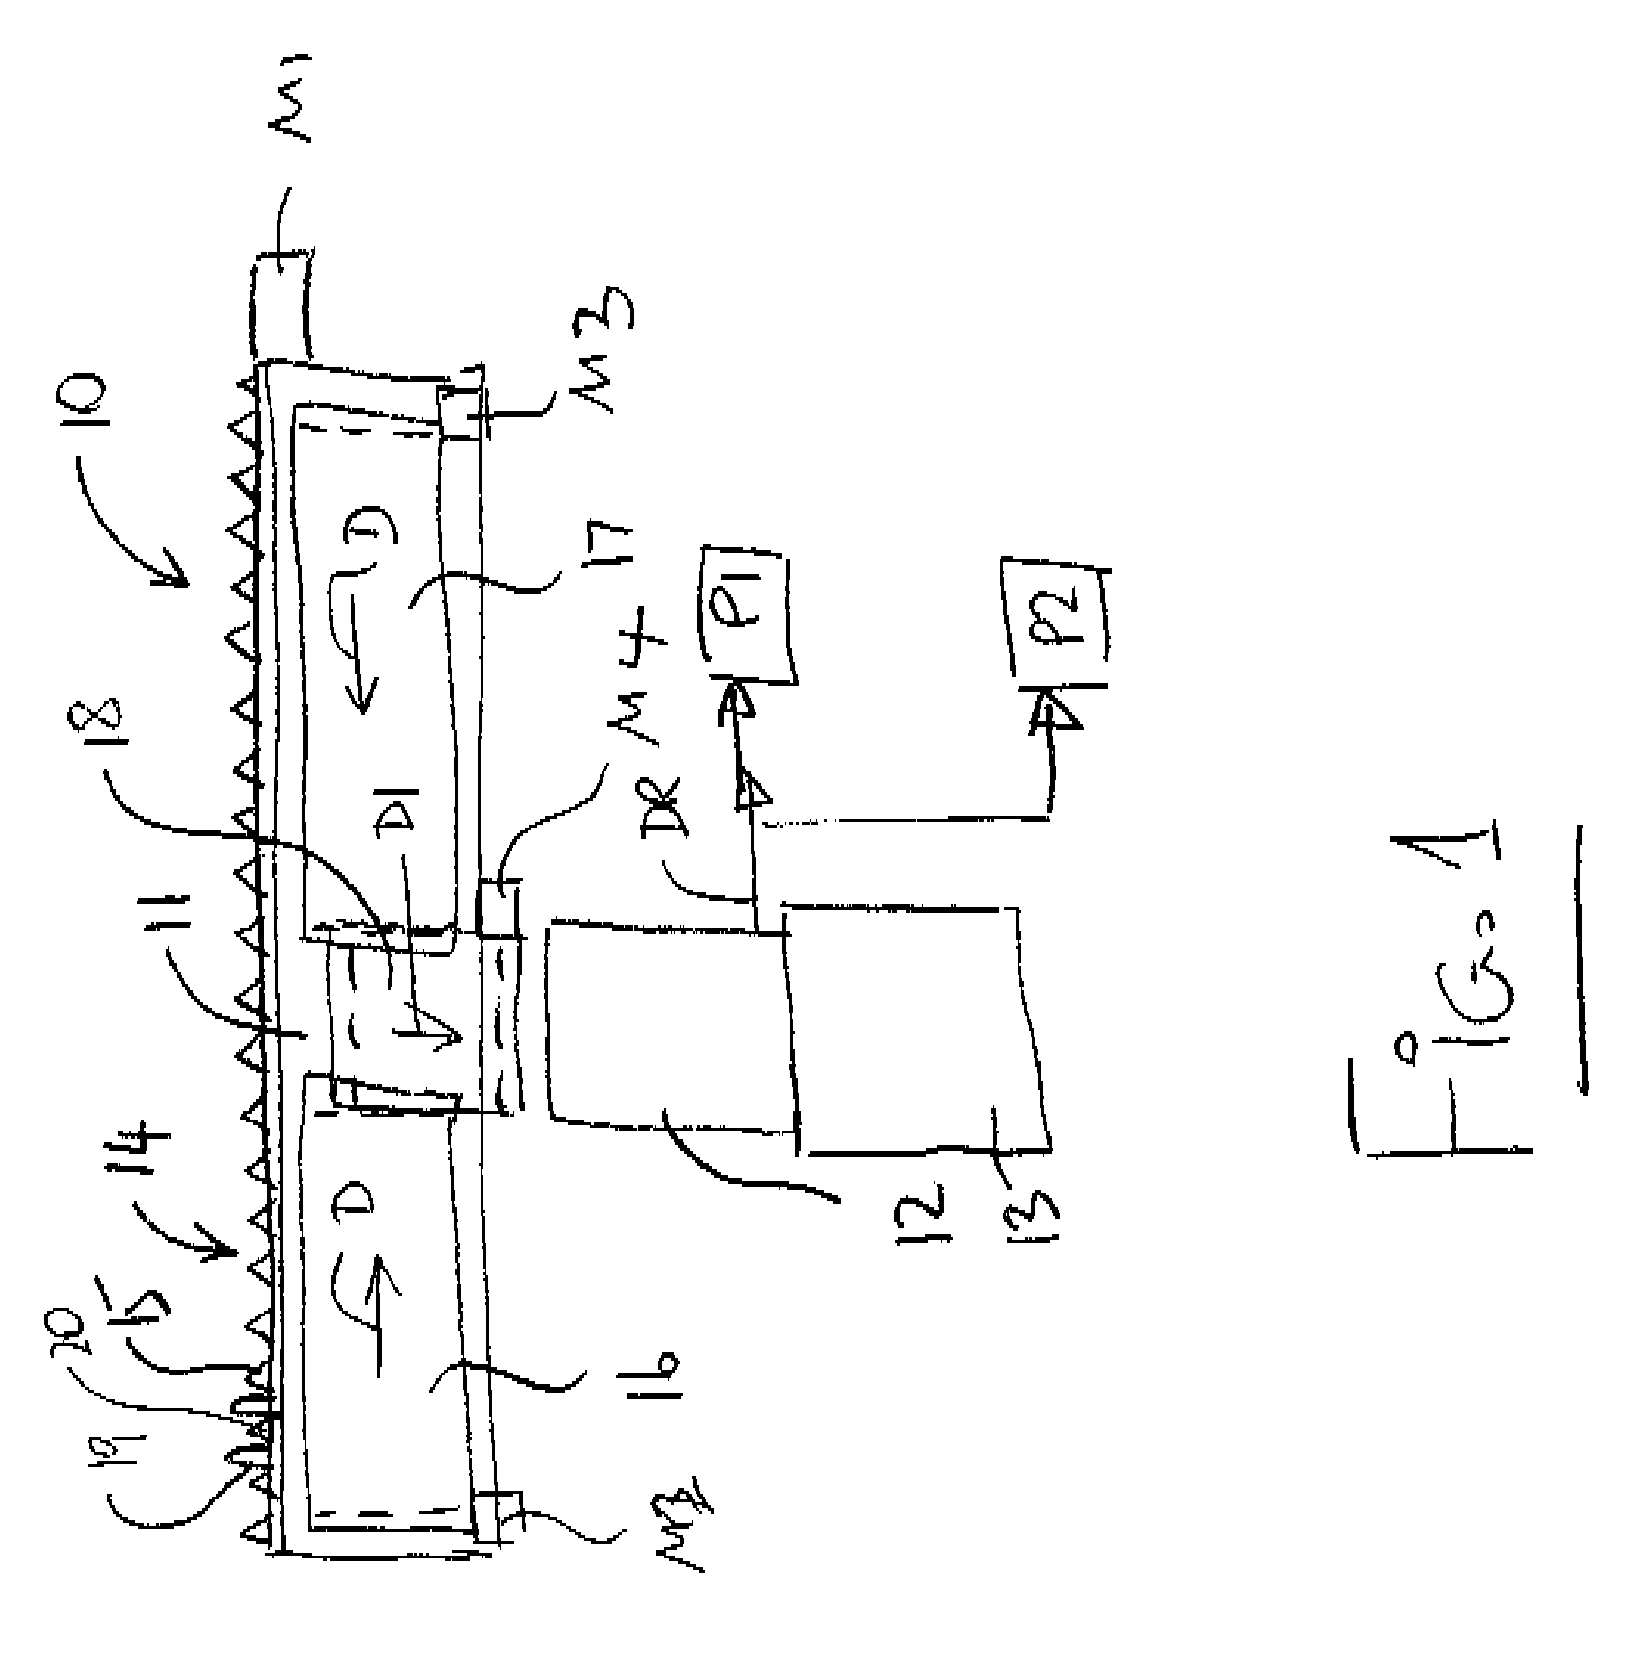 Crop harvesting header with reversible drive to the sickle knife